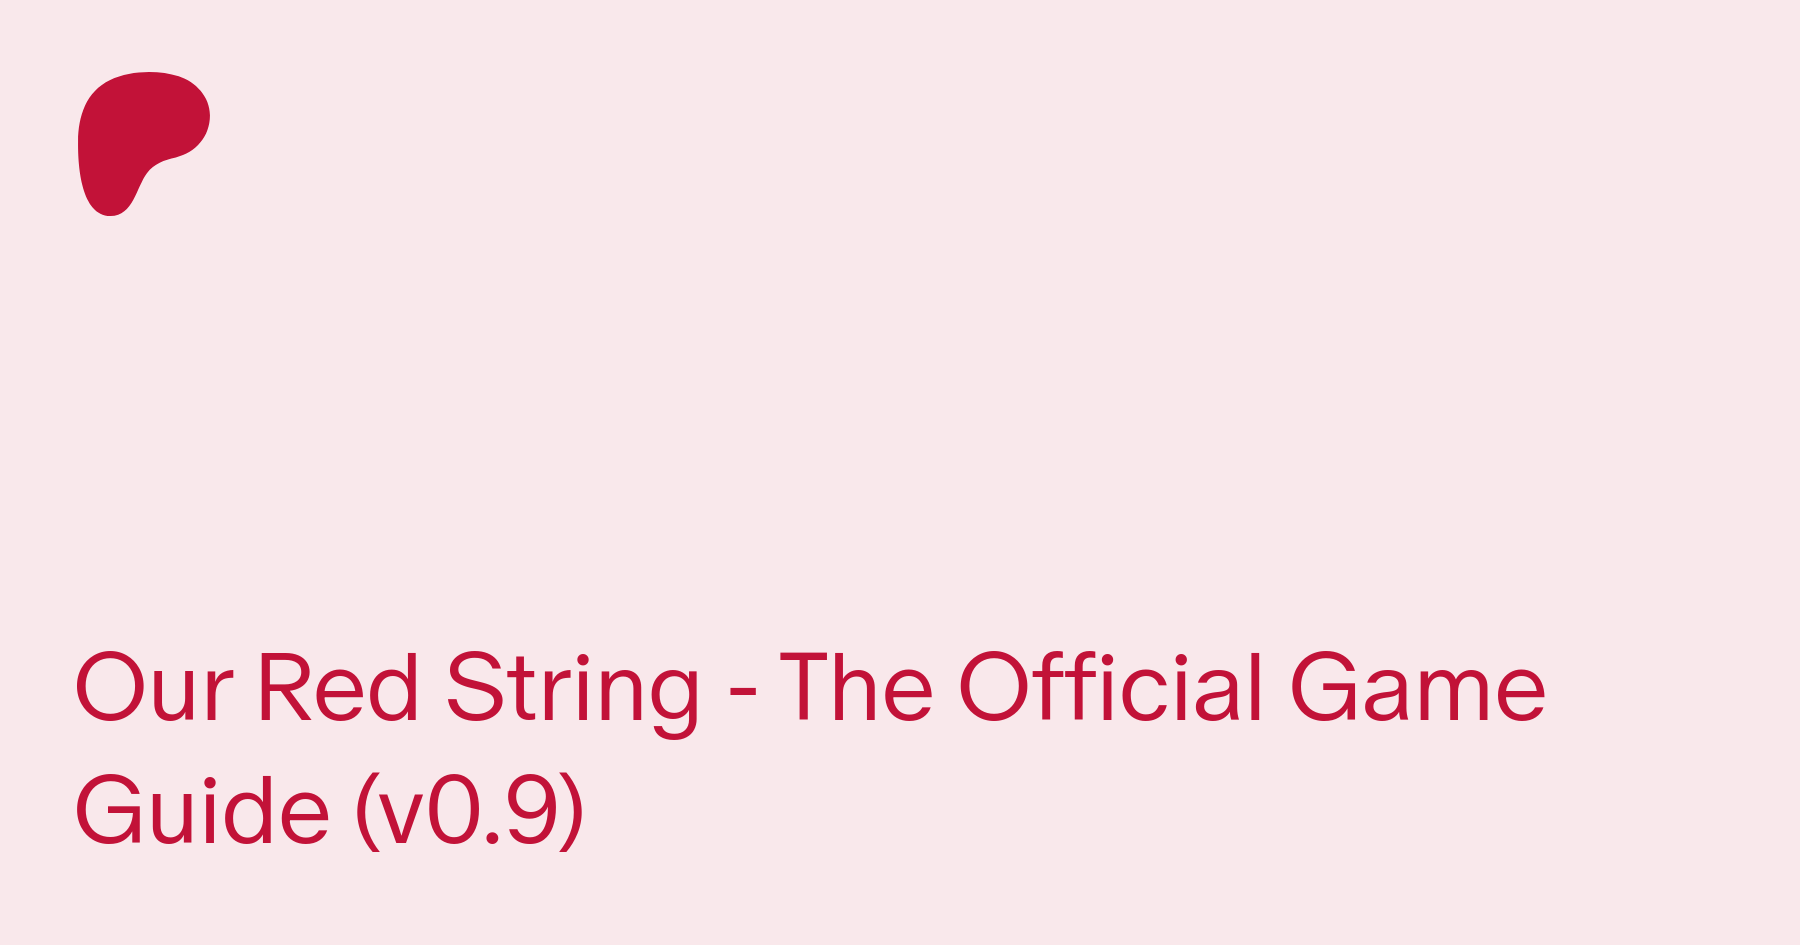 Our Red String - The Official Game Guide (v0.9) | Patreon